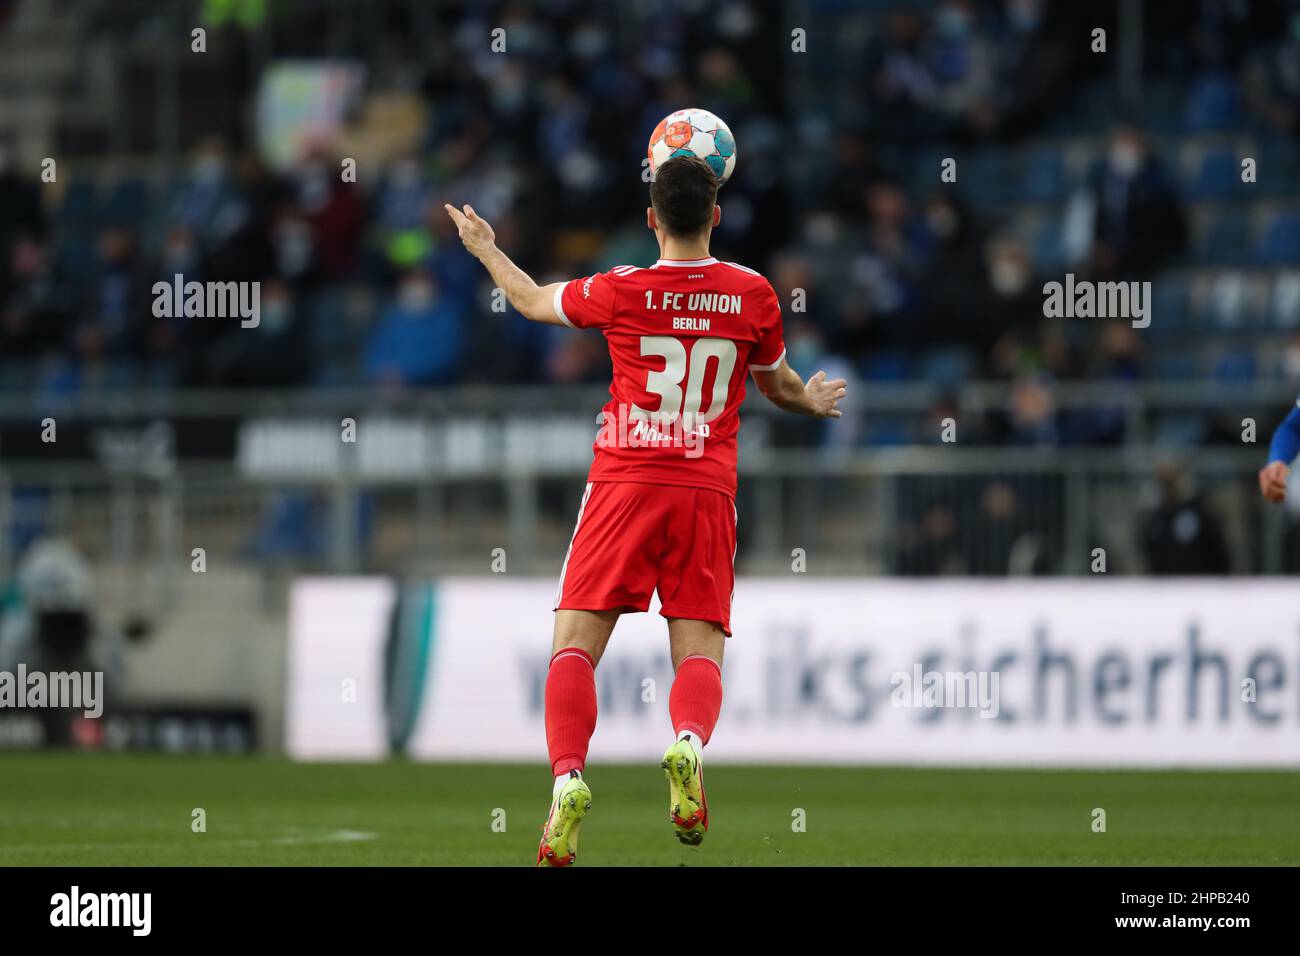 Bielefeld, Germany. 19th Feb, 2022. Soccer: Bundesliga, Arminia Bielefeld - 1. FC Union Berlin, Matchday 23 at Schüco Arena. Berlin's Kevin Möhwald heads the ball. Credit: Friso Gentsch/dpa - IMPORTANT NOTE: In accordance with the requirements of the DFL Deutsche Fußball Liga and the DFB Deutscher Fußball-Bund, it is prohibited to use or have used photographs taken in the stadium and/or of the match in the form of sequence pictures and/or video-like photo series./dpa/Alamy Live News Stock Photo